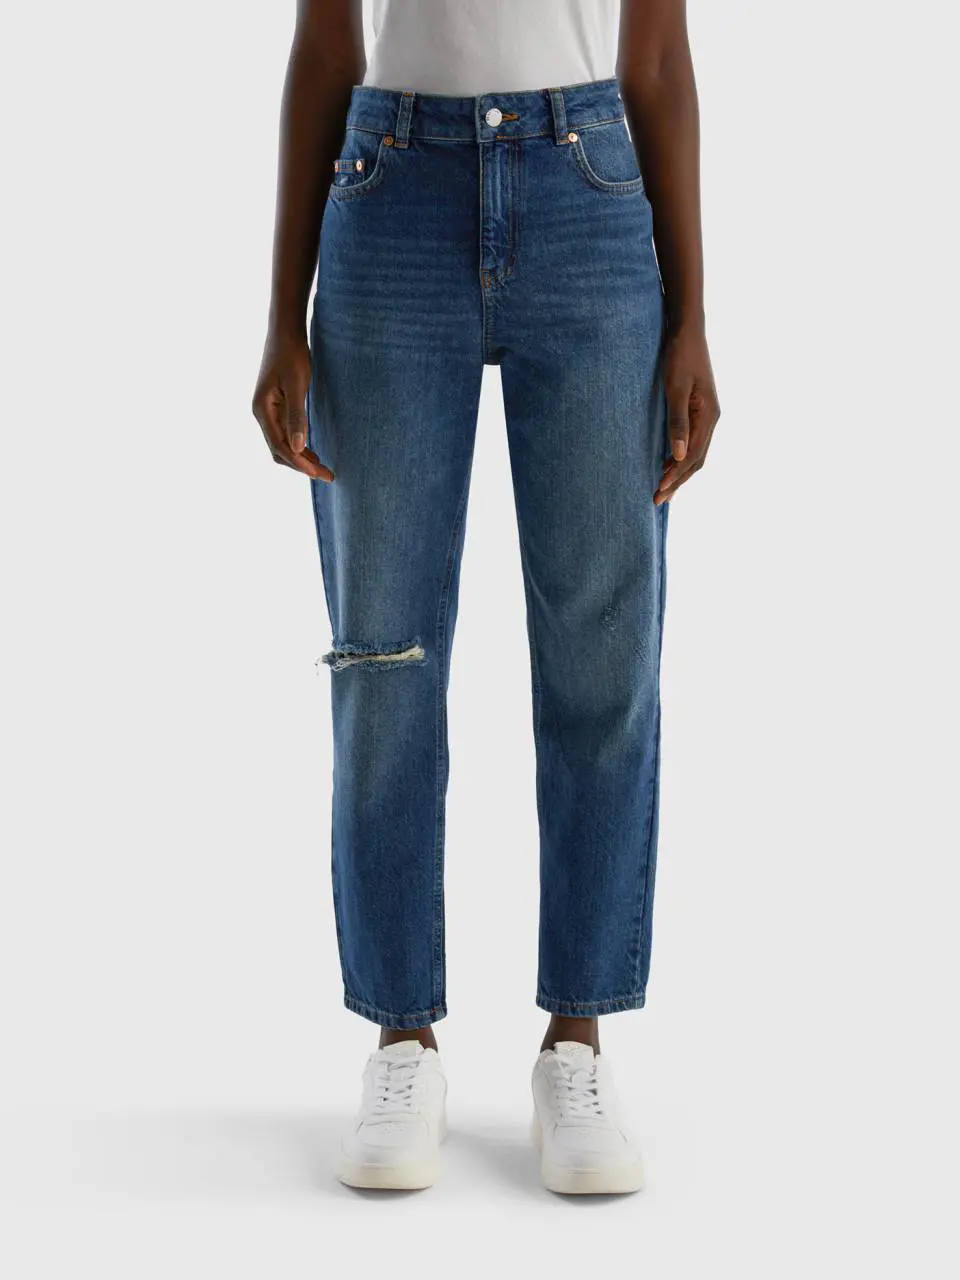 Benetton cropped high-waisted jeans. 1